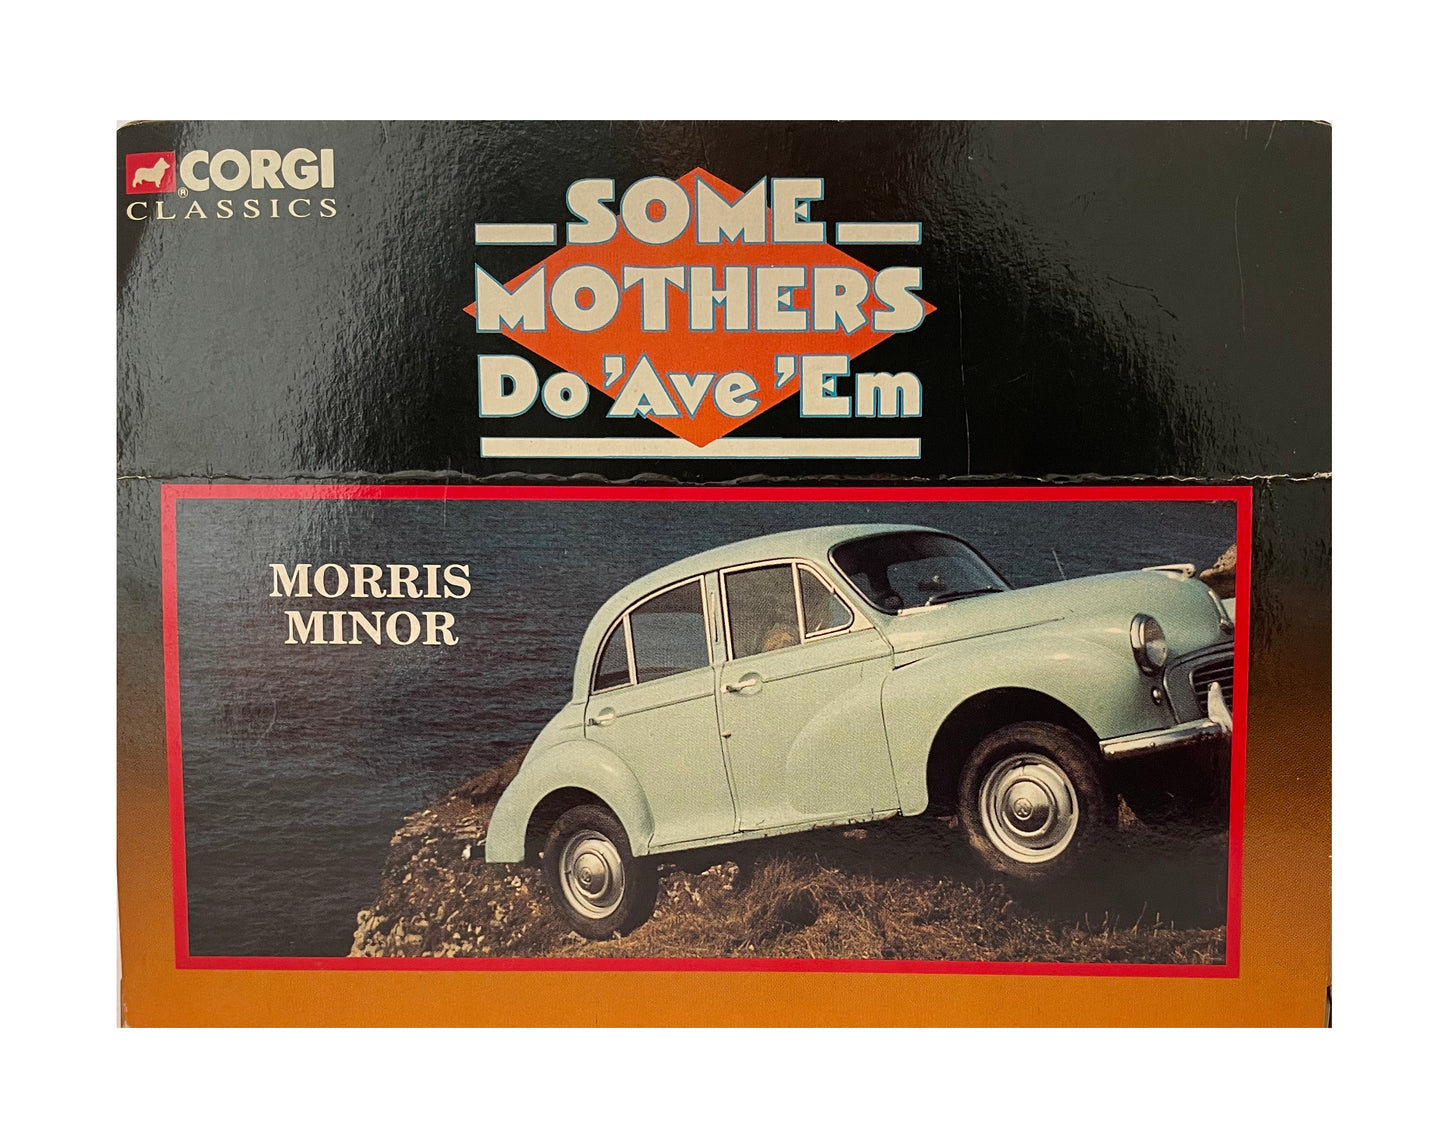 Vintage Corgi Classic's 1995 Some Mother Do Ave Em  - Frank Spencers Morris Minor Die Cast Replica 1.43 Scale Model Vehicle - Brand New Shop Stock Room Find